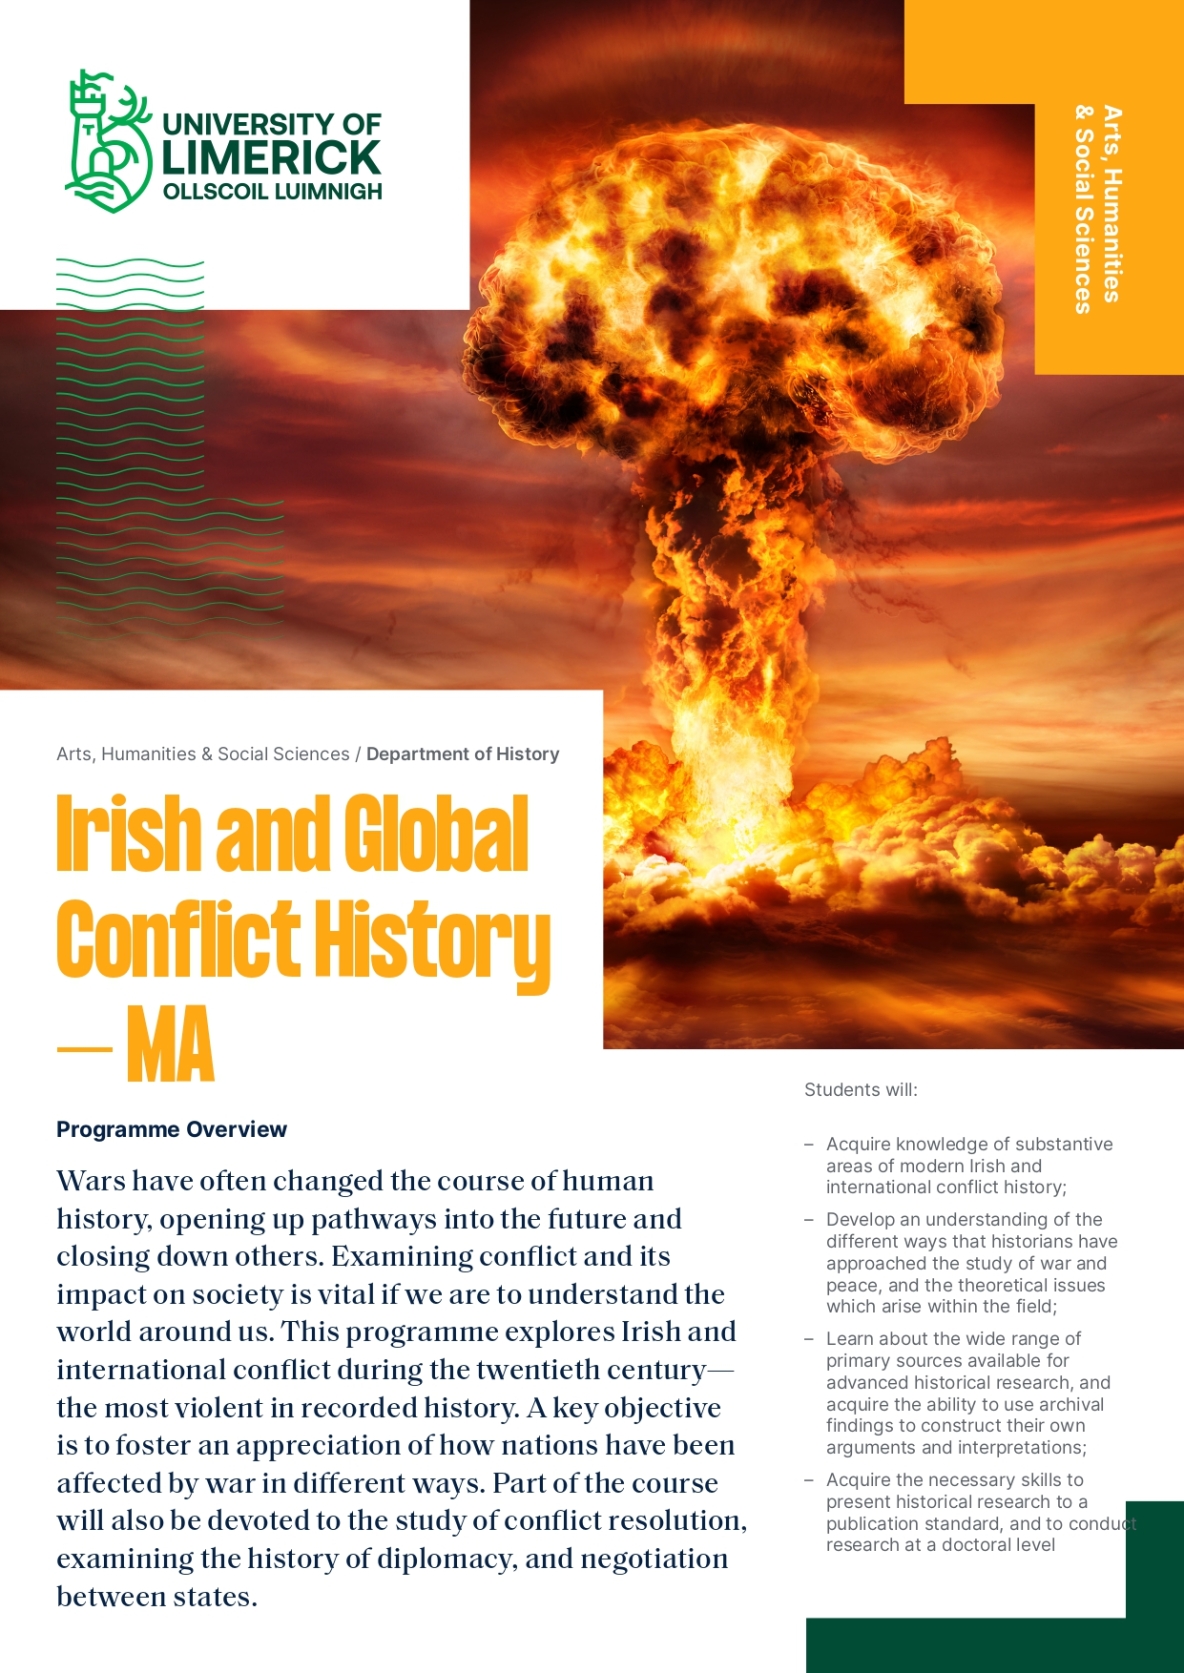 Irish and Global Conflict History MA